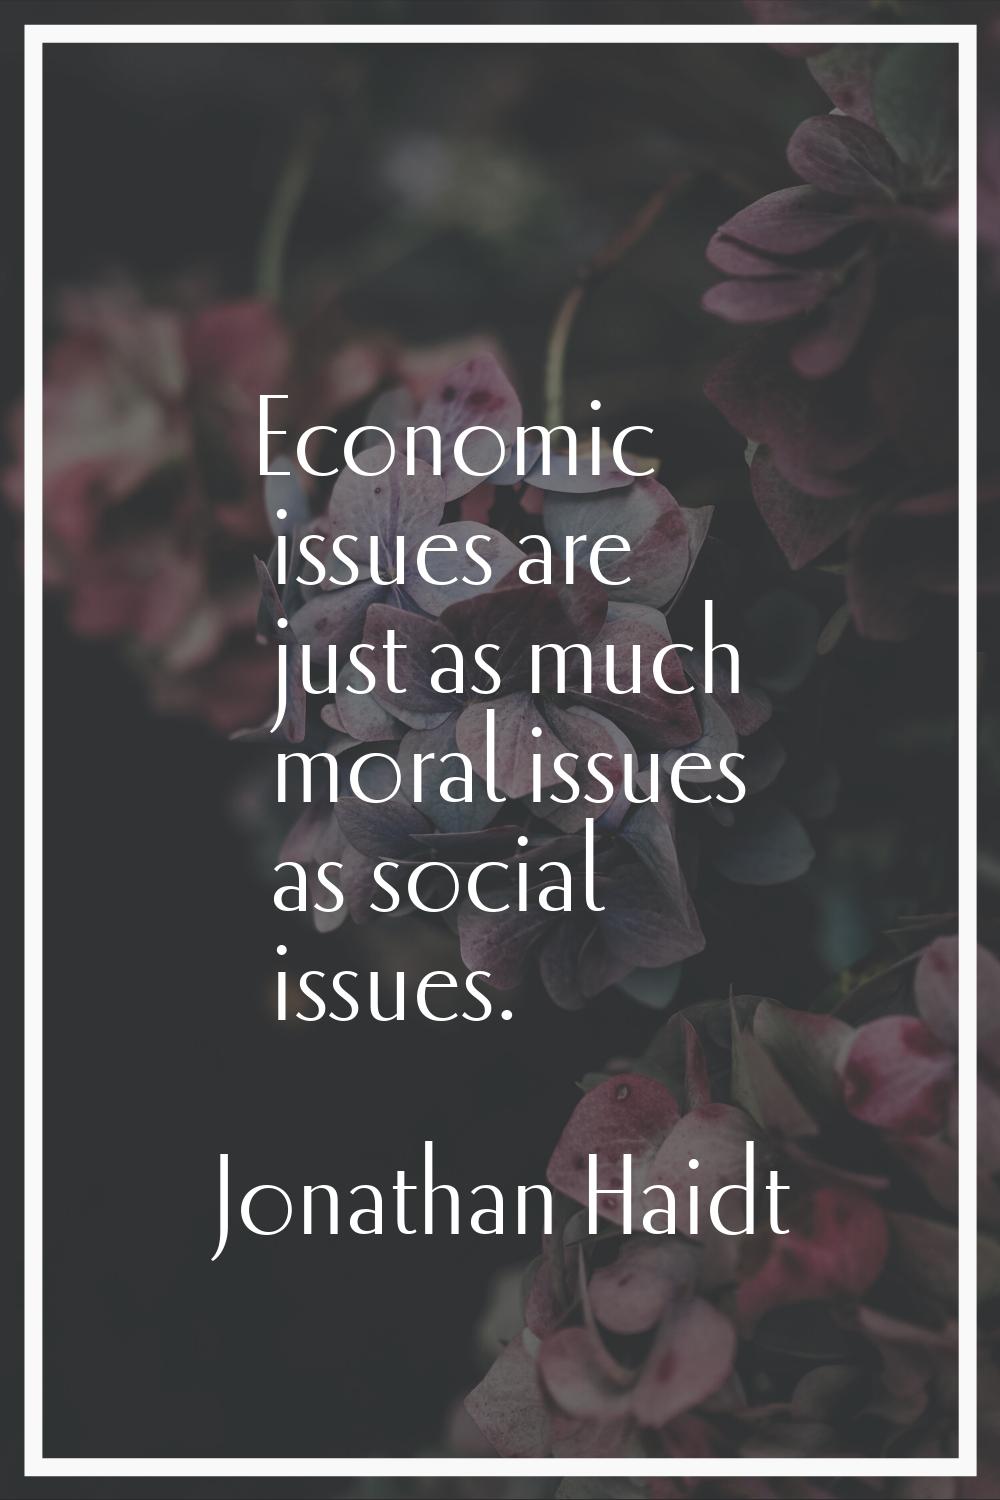 Economic issues are just as much moral issues as social issues.